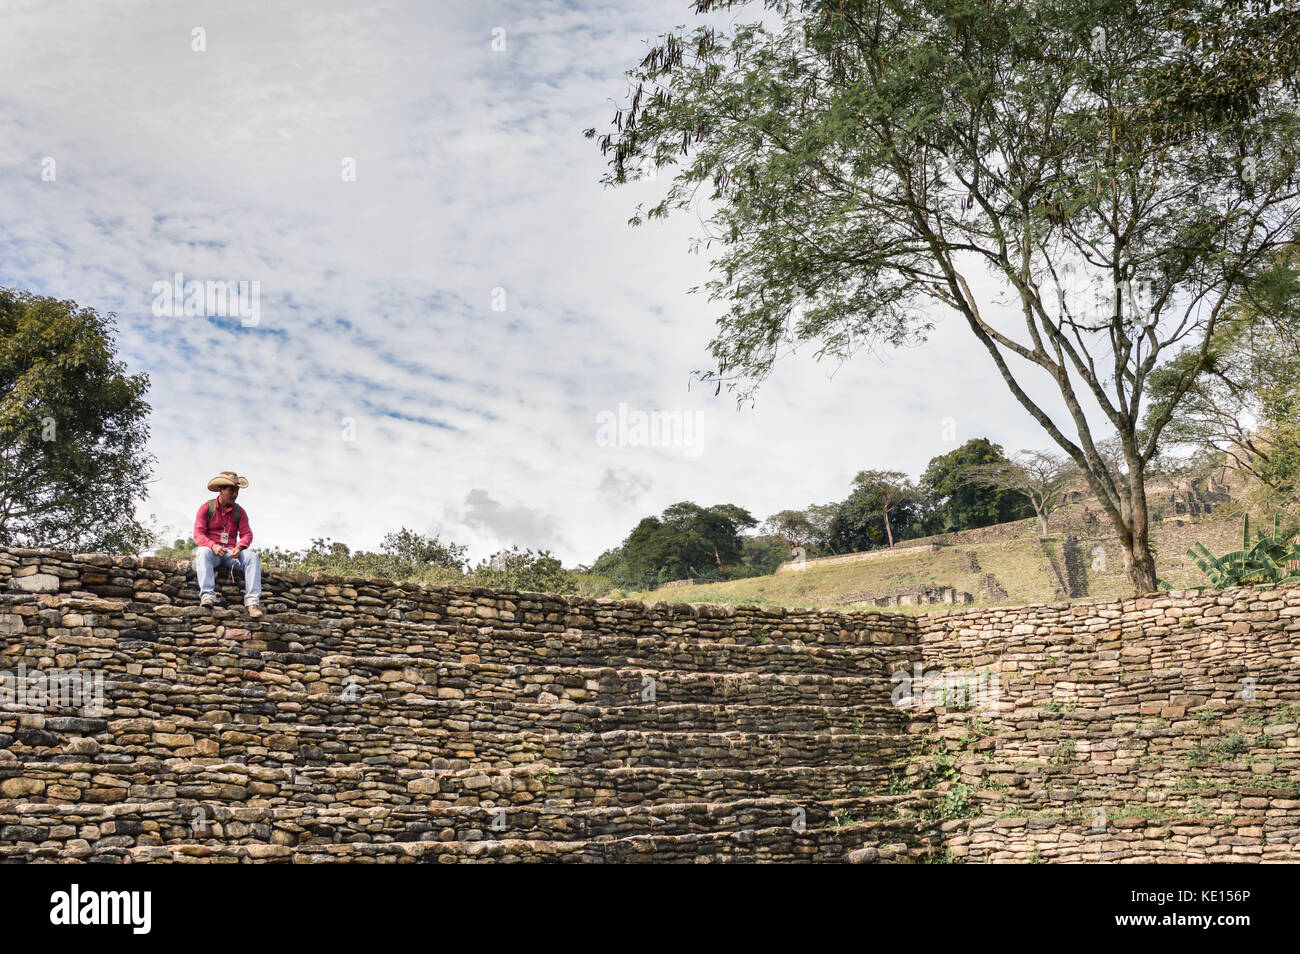 Ocosingo, Mexico - January 9, 2015: Local tour guide takes rest on the steps of one of the pyramids at Tonina archaeological site in Chiapas, Mexico Stock Photo